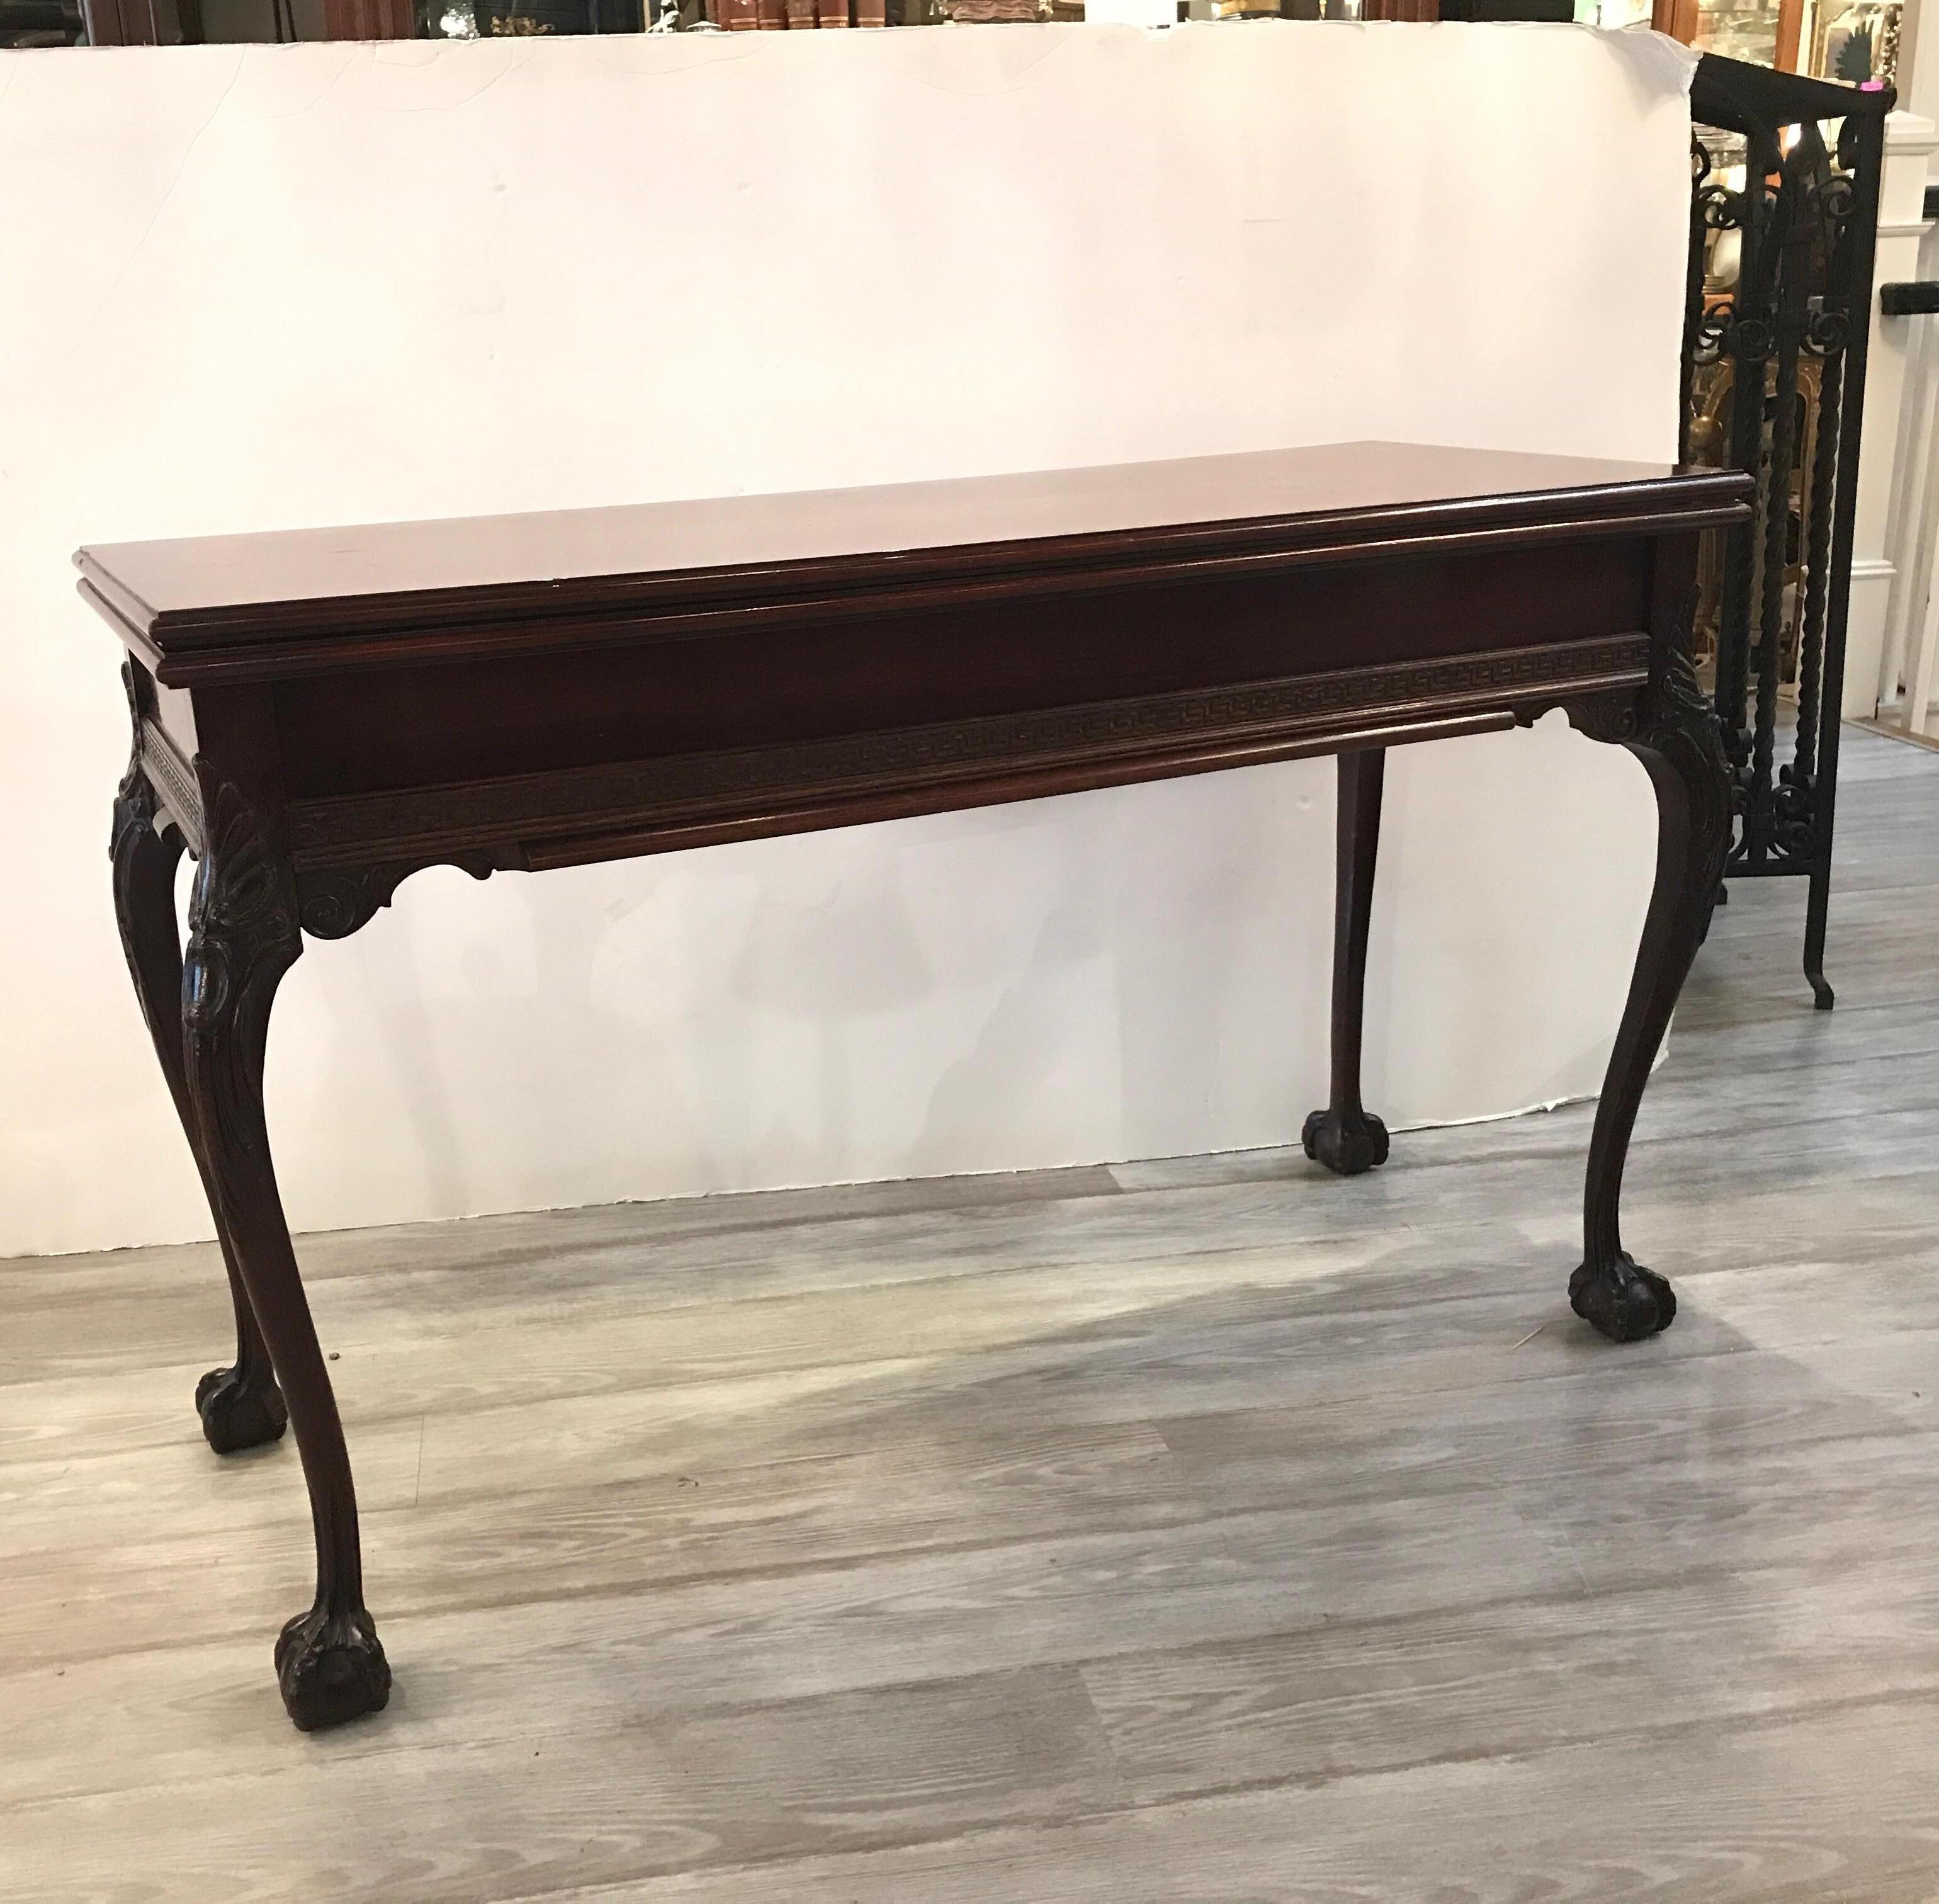 Wonderful Chippendale style mahogany console table that opes to a dining table. The top flips open to double the surface. The two side legs pull out to open the table even large with three 11.5 inch leaves. The top flips and you attach the leaves on